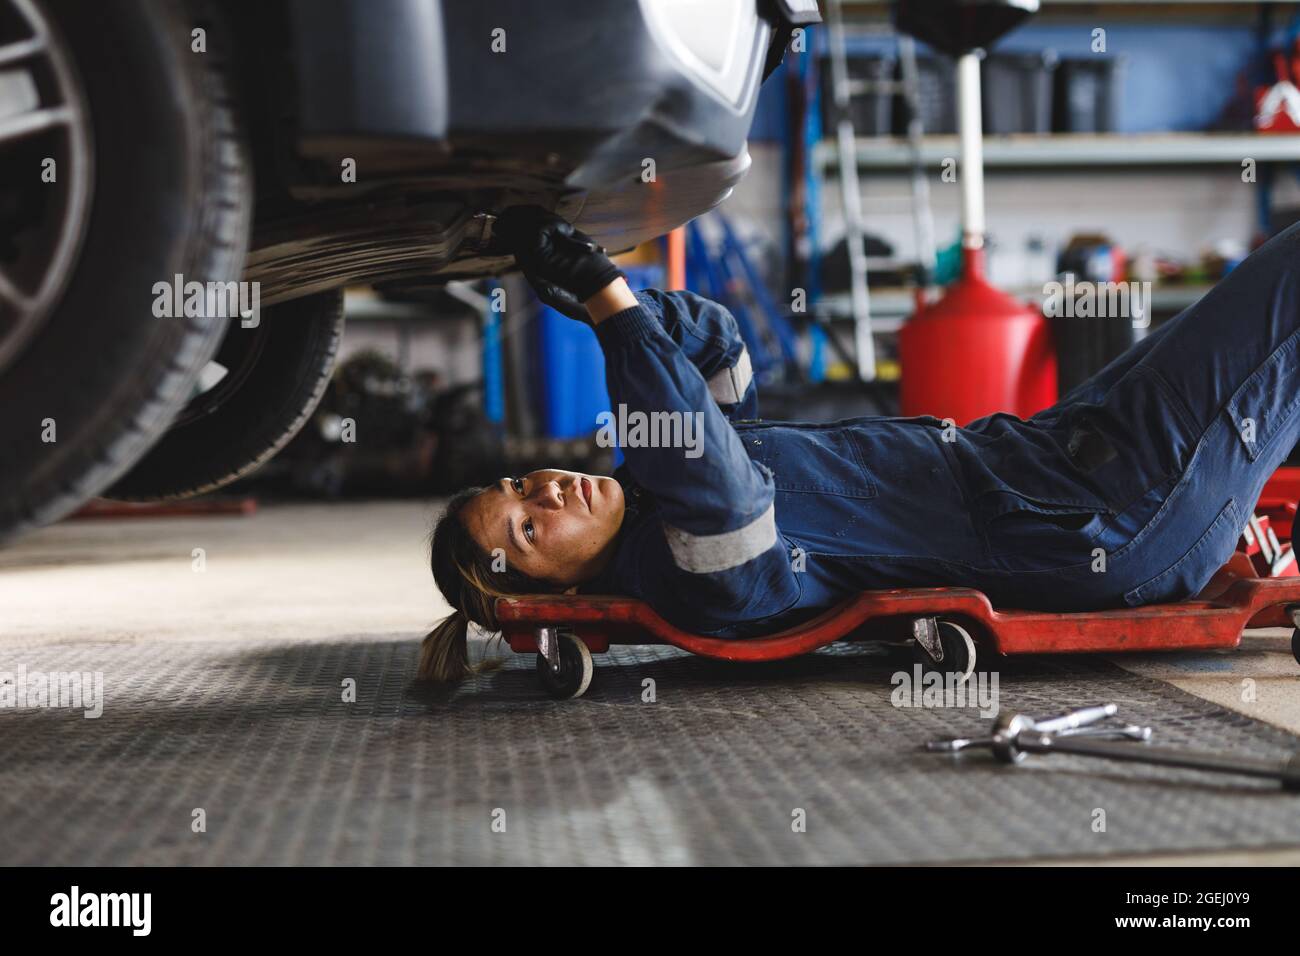 Mixed race female car mechanic wearing overalls, lying on a board